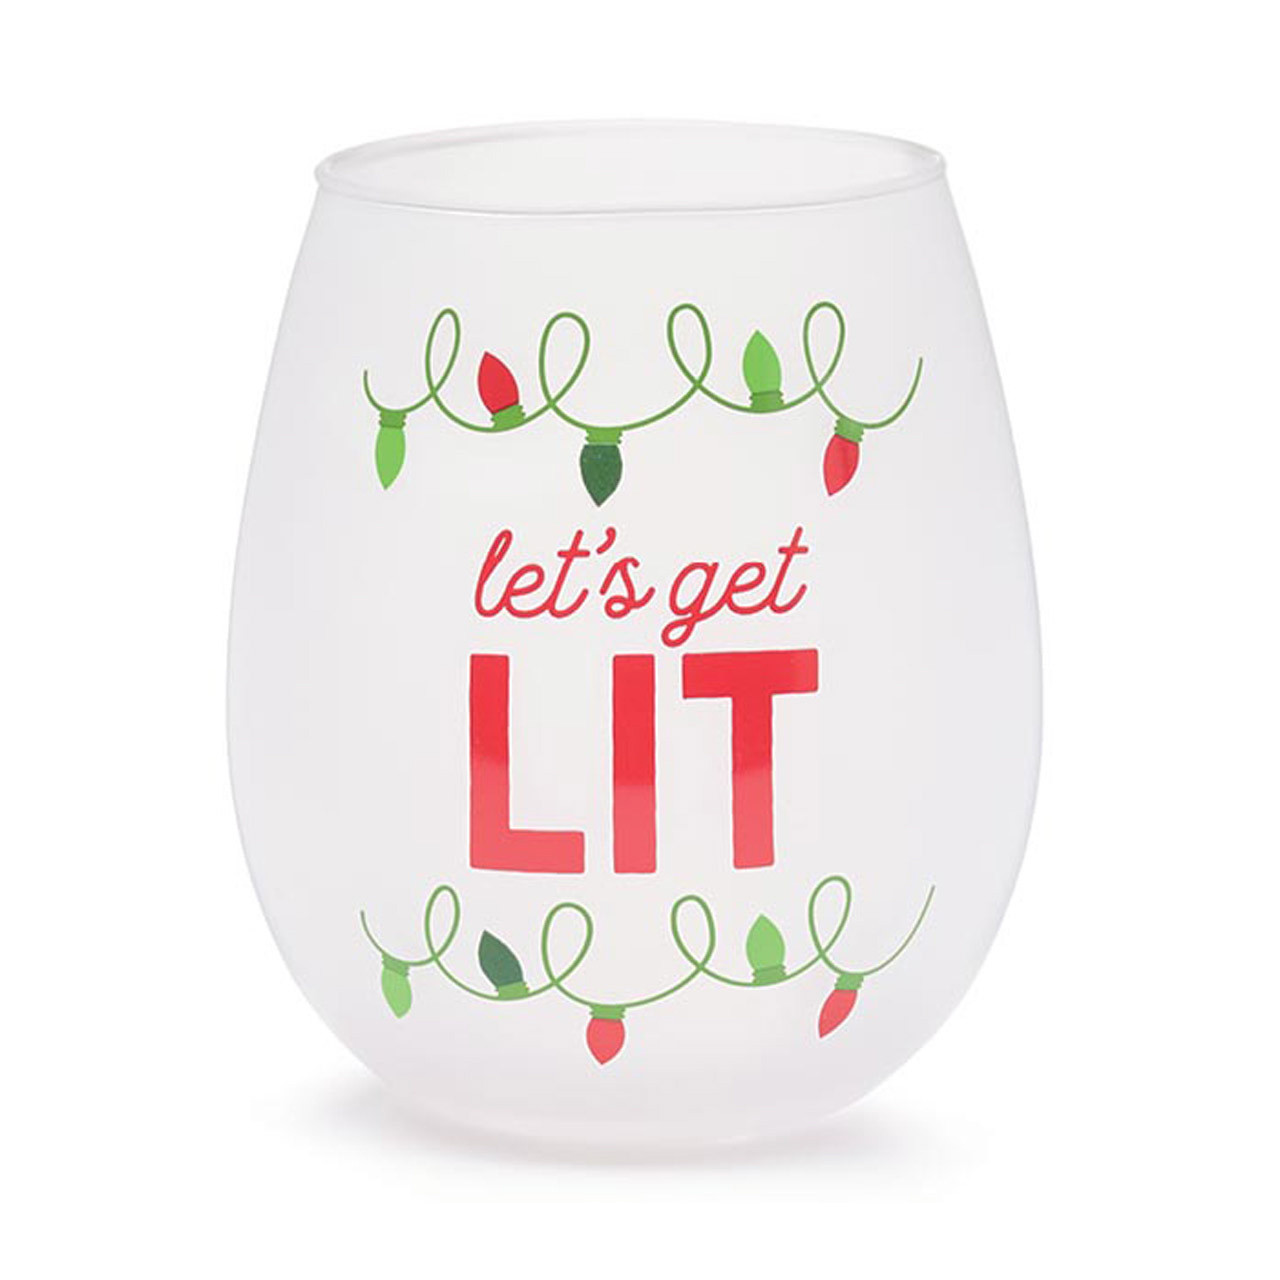 https://cdn11.bigcommerce.com/s-6zwhmb4rdr/images/stencil/1280x1280/products/66499/188115/the-lamp-stand-burton-burton-stemless-wine-glass-lets-get-lit-9742569-1__30167.1633547622.jpg?c=1